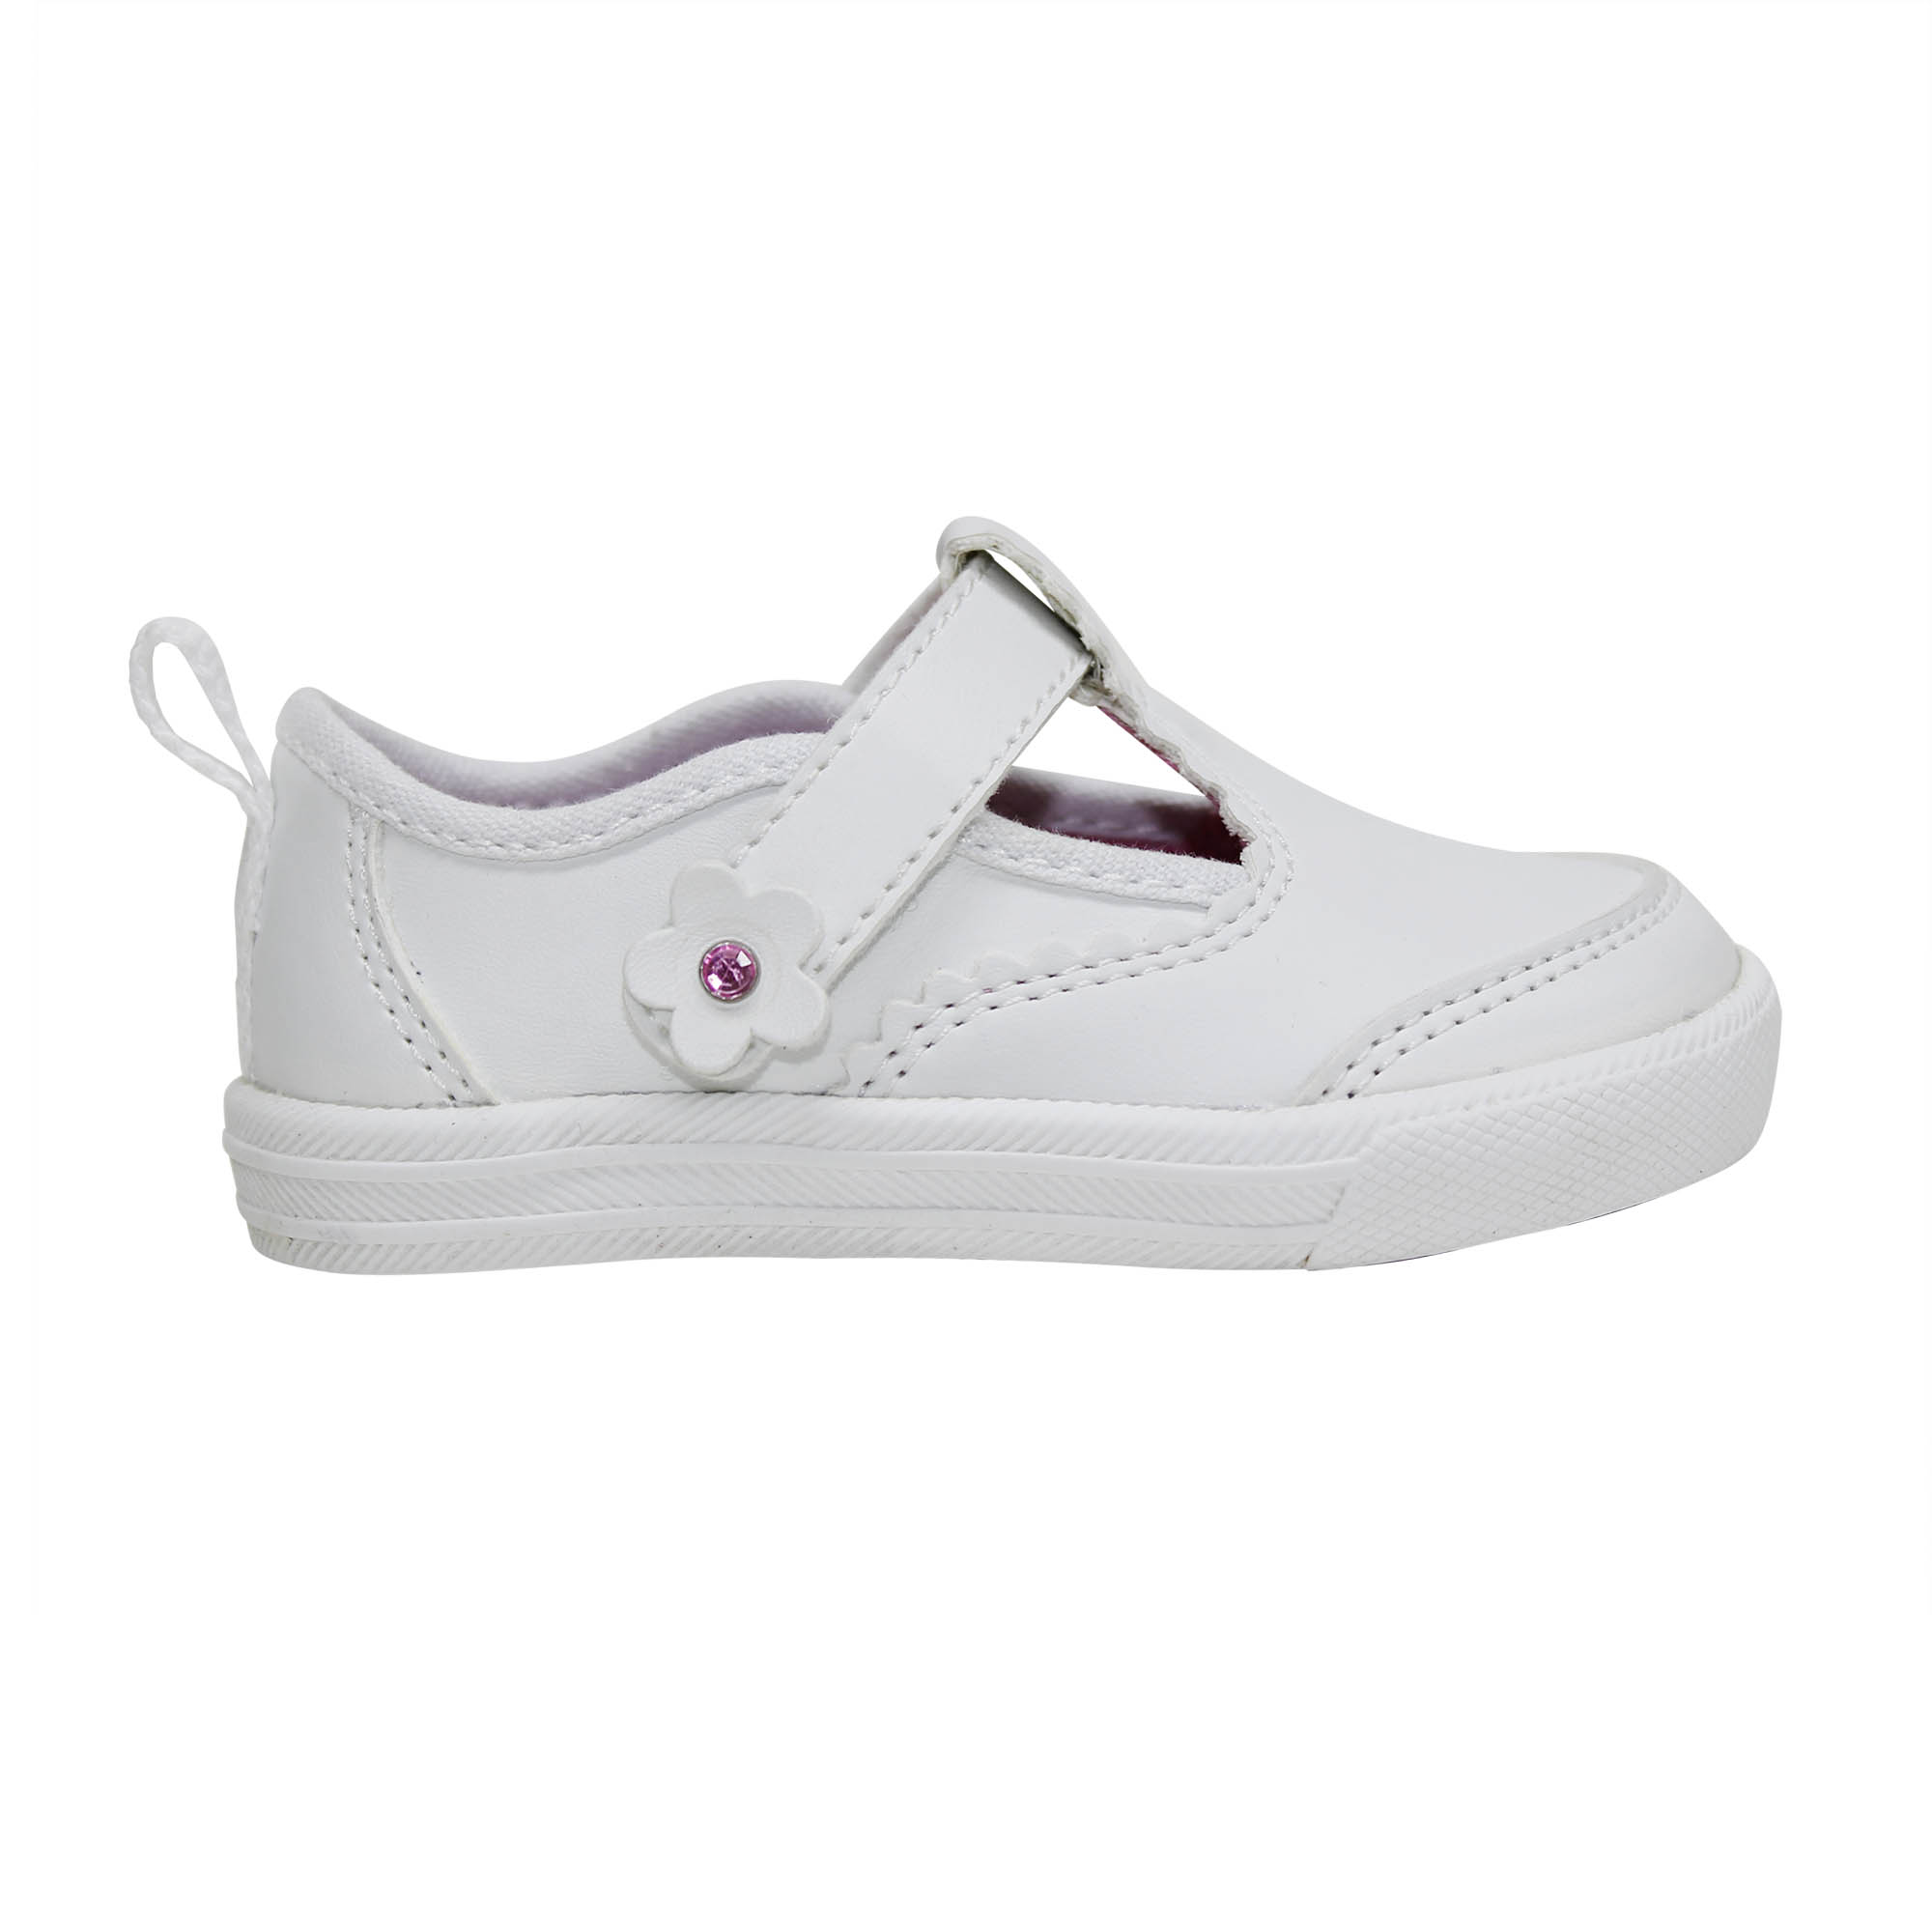 Infant Girl Garanimals Lauraie Casual shoes - image 2 of 6